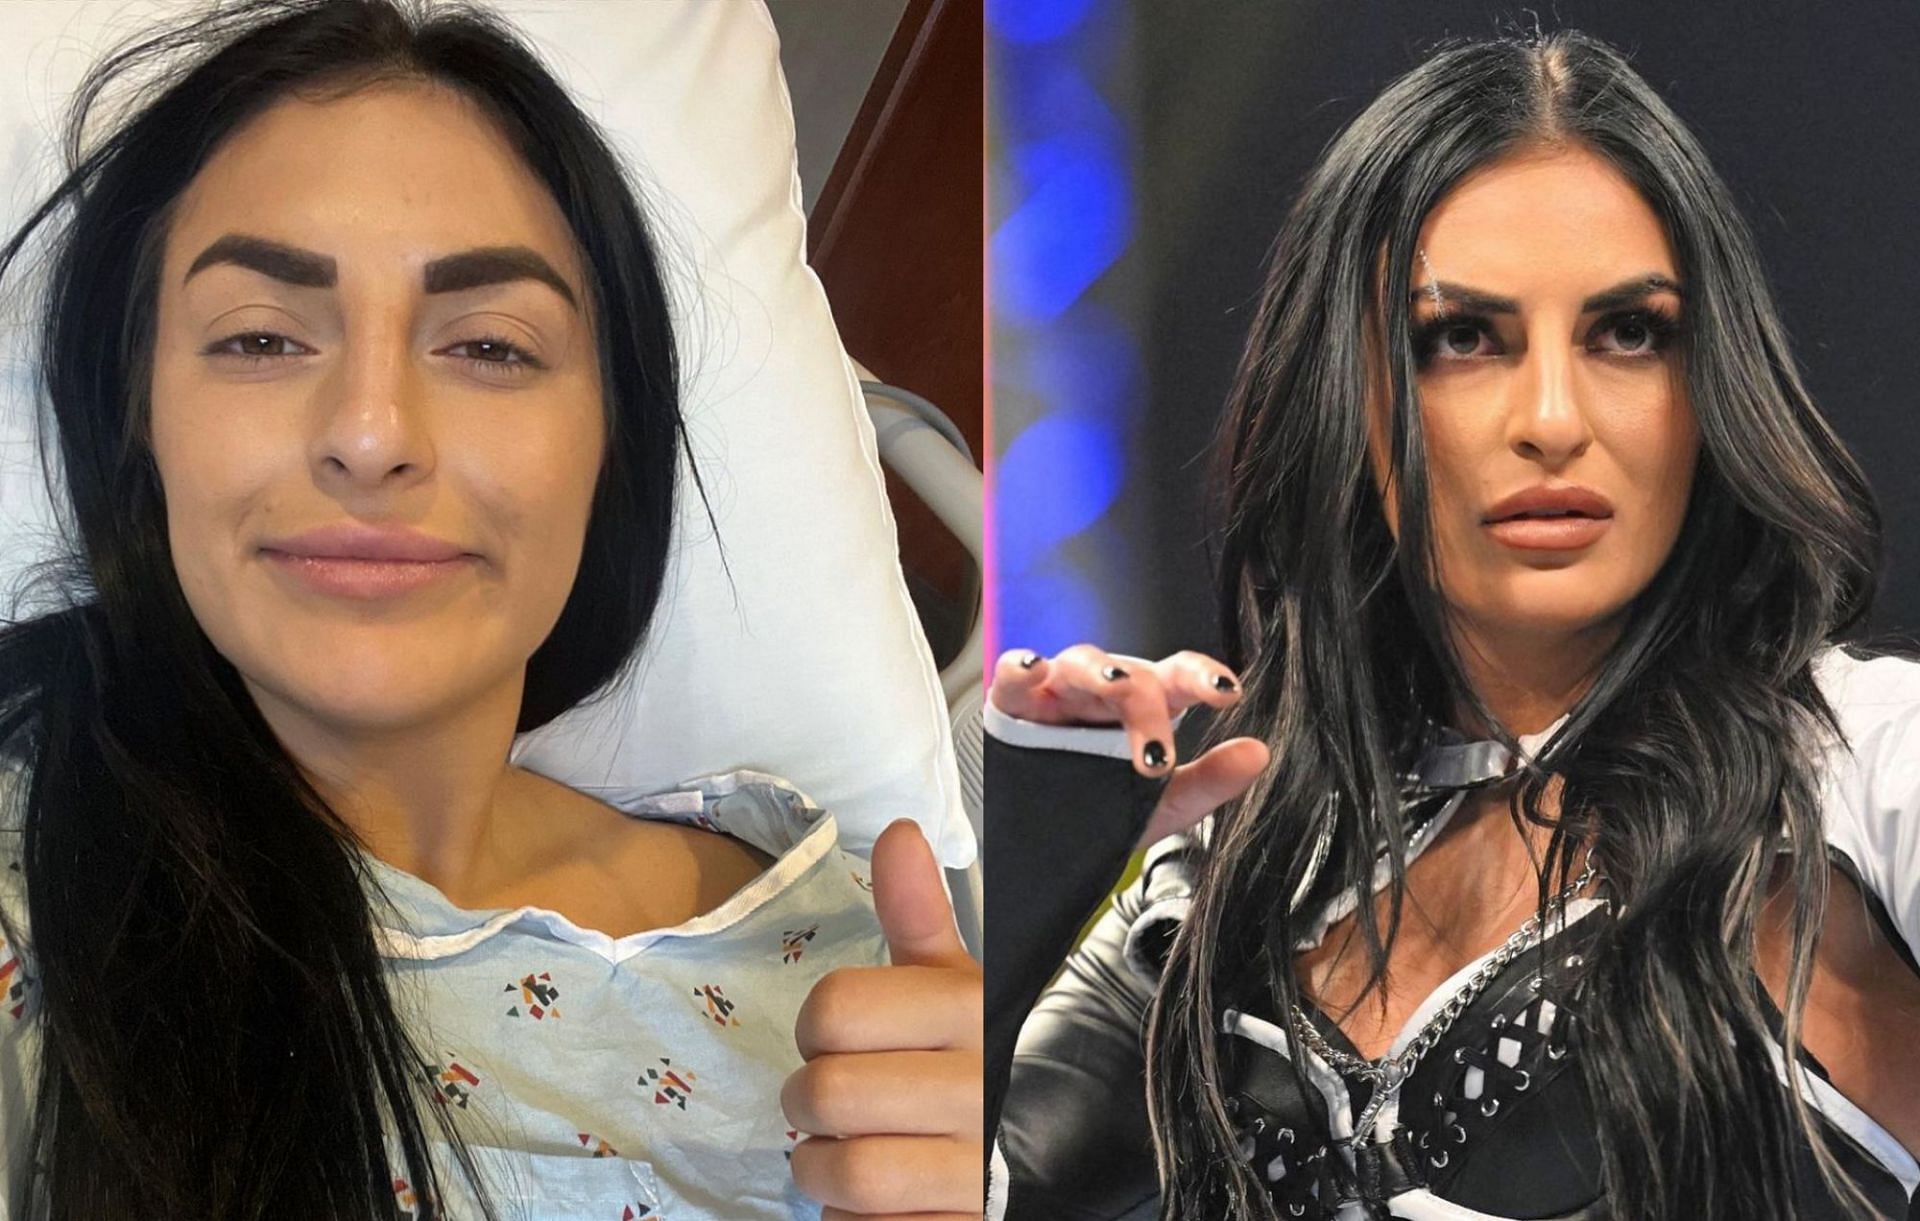 Sonya Deville is currently on a hiatus due to her injury